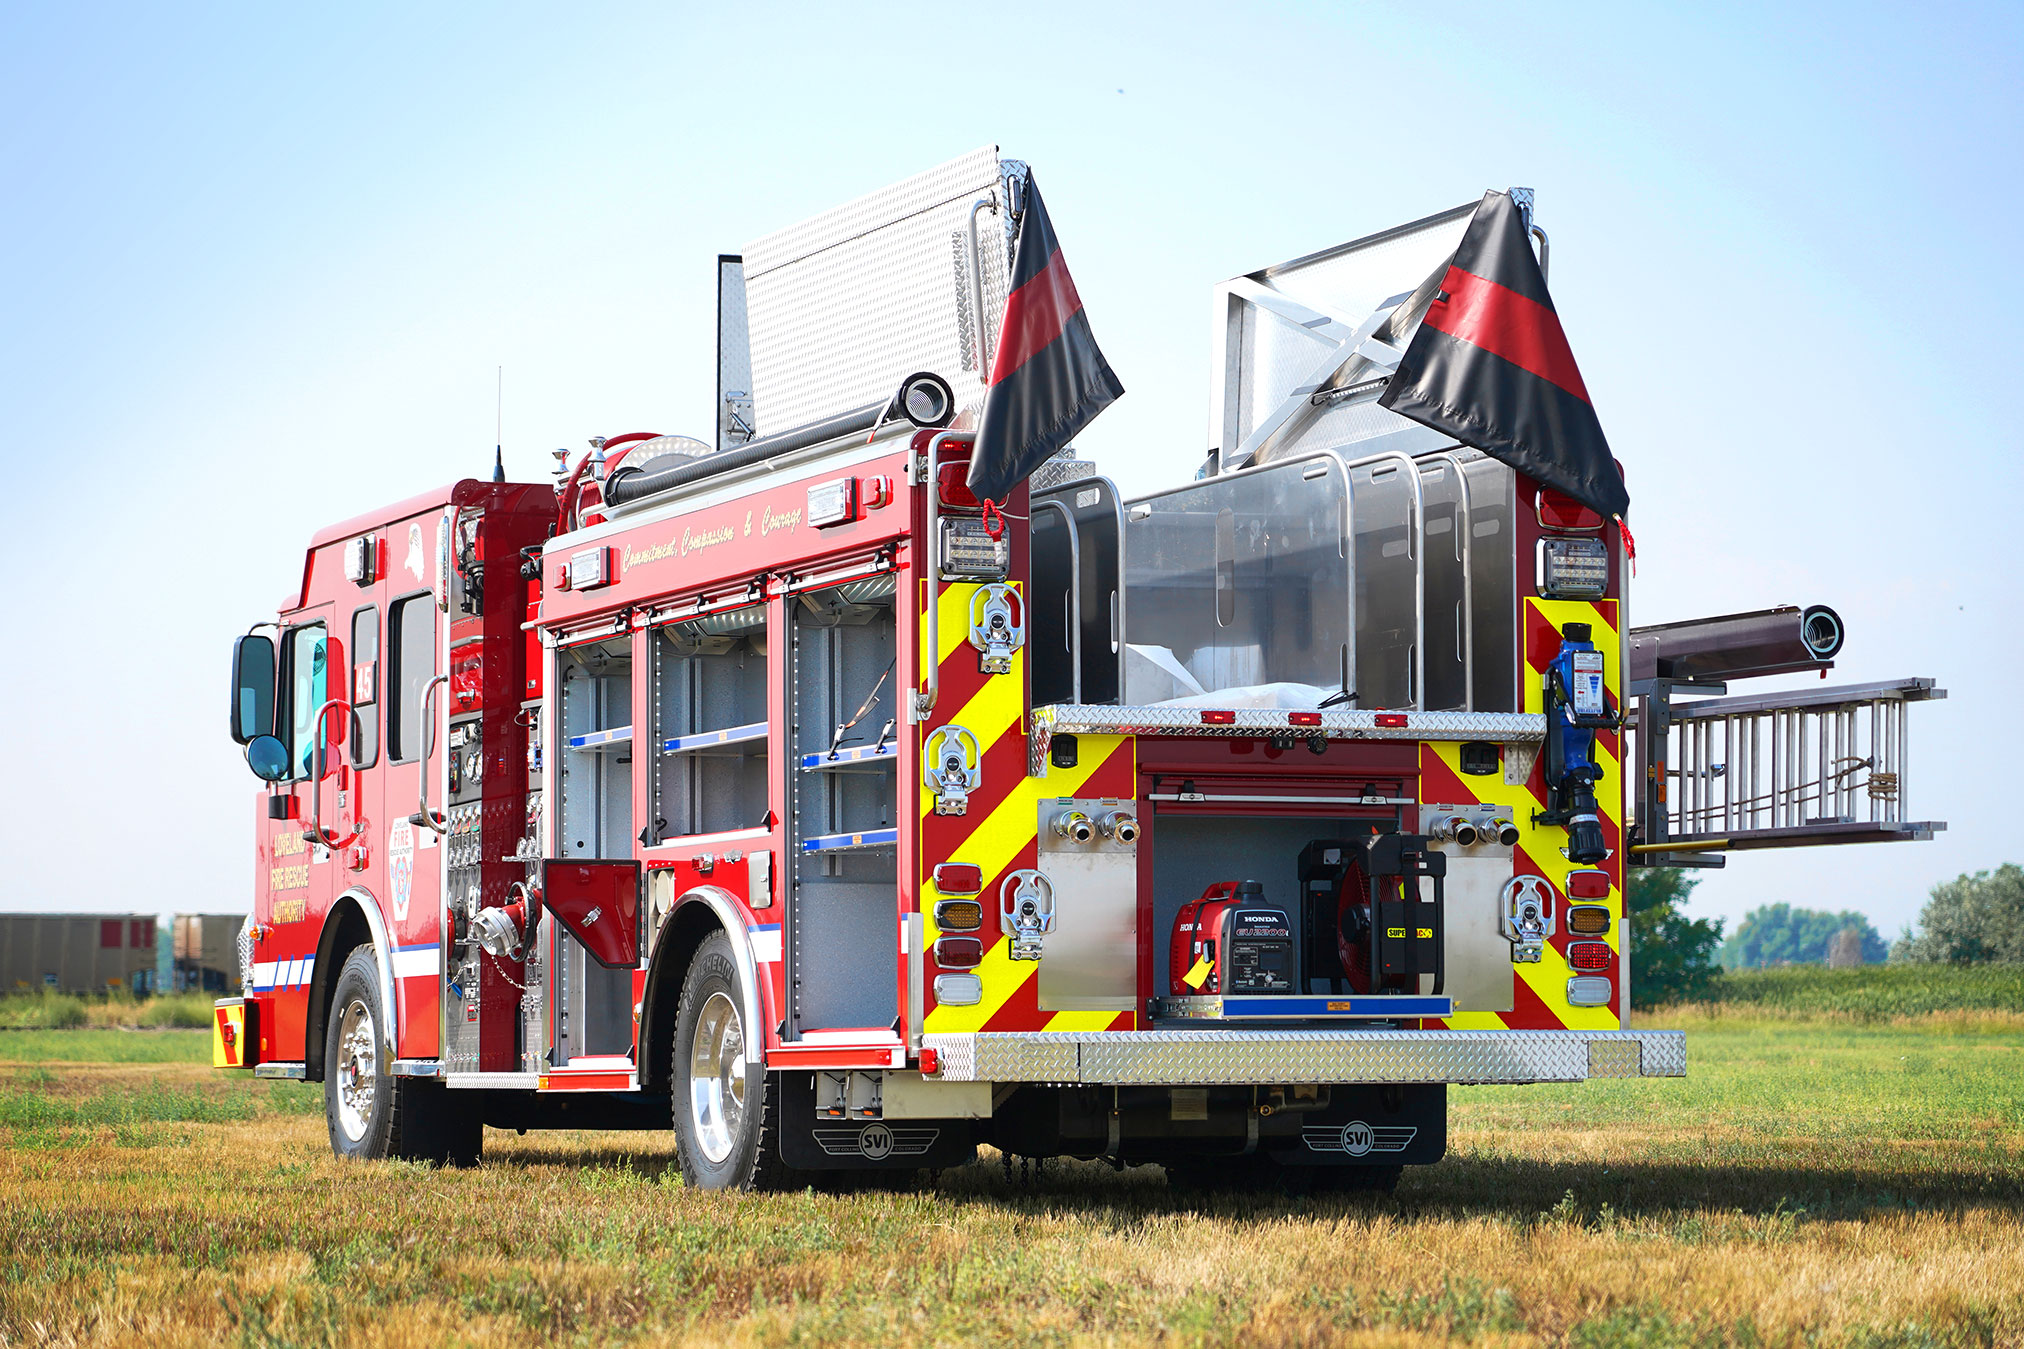 Featured image for “Loveland Fire Rescue Authority Rescue Pumper #1159”